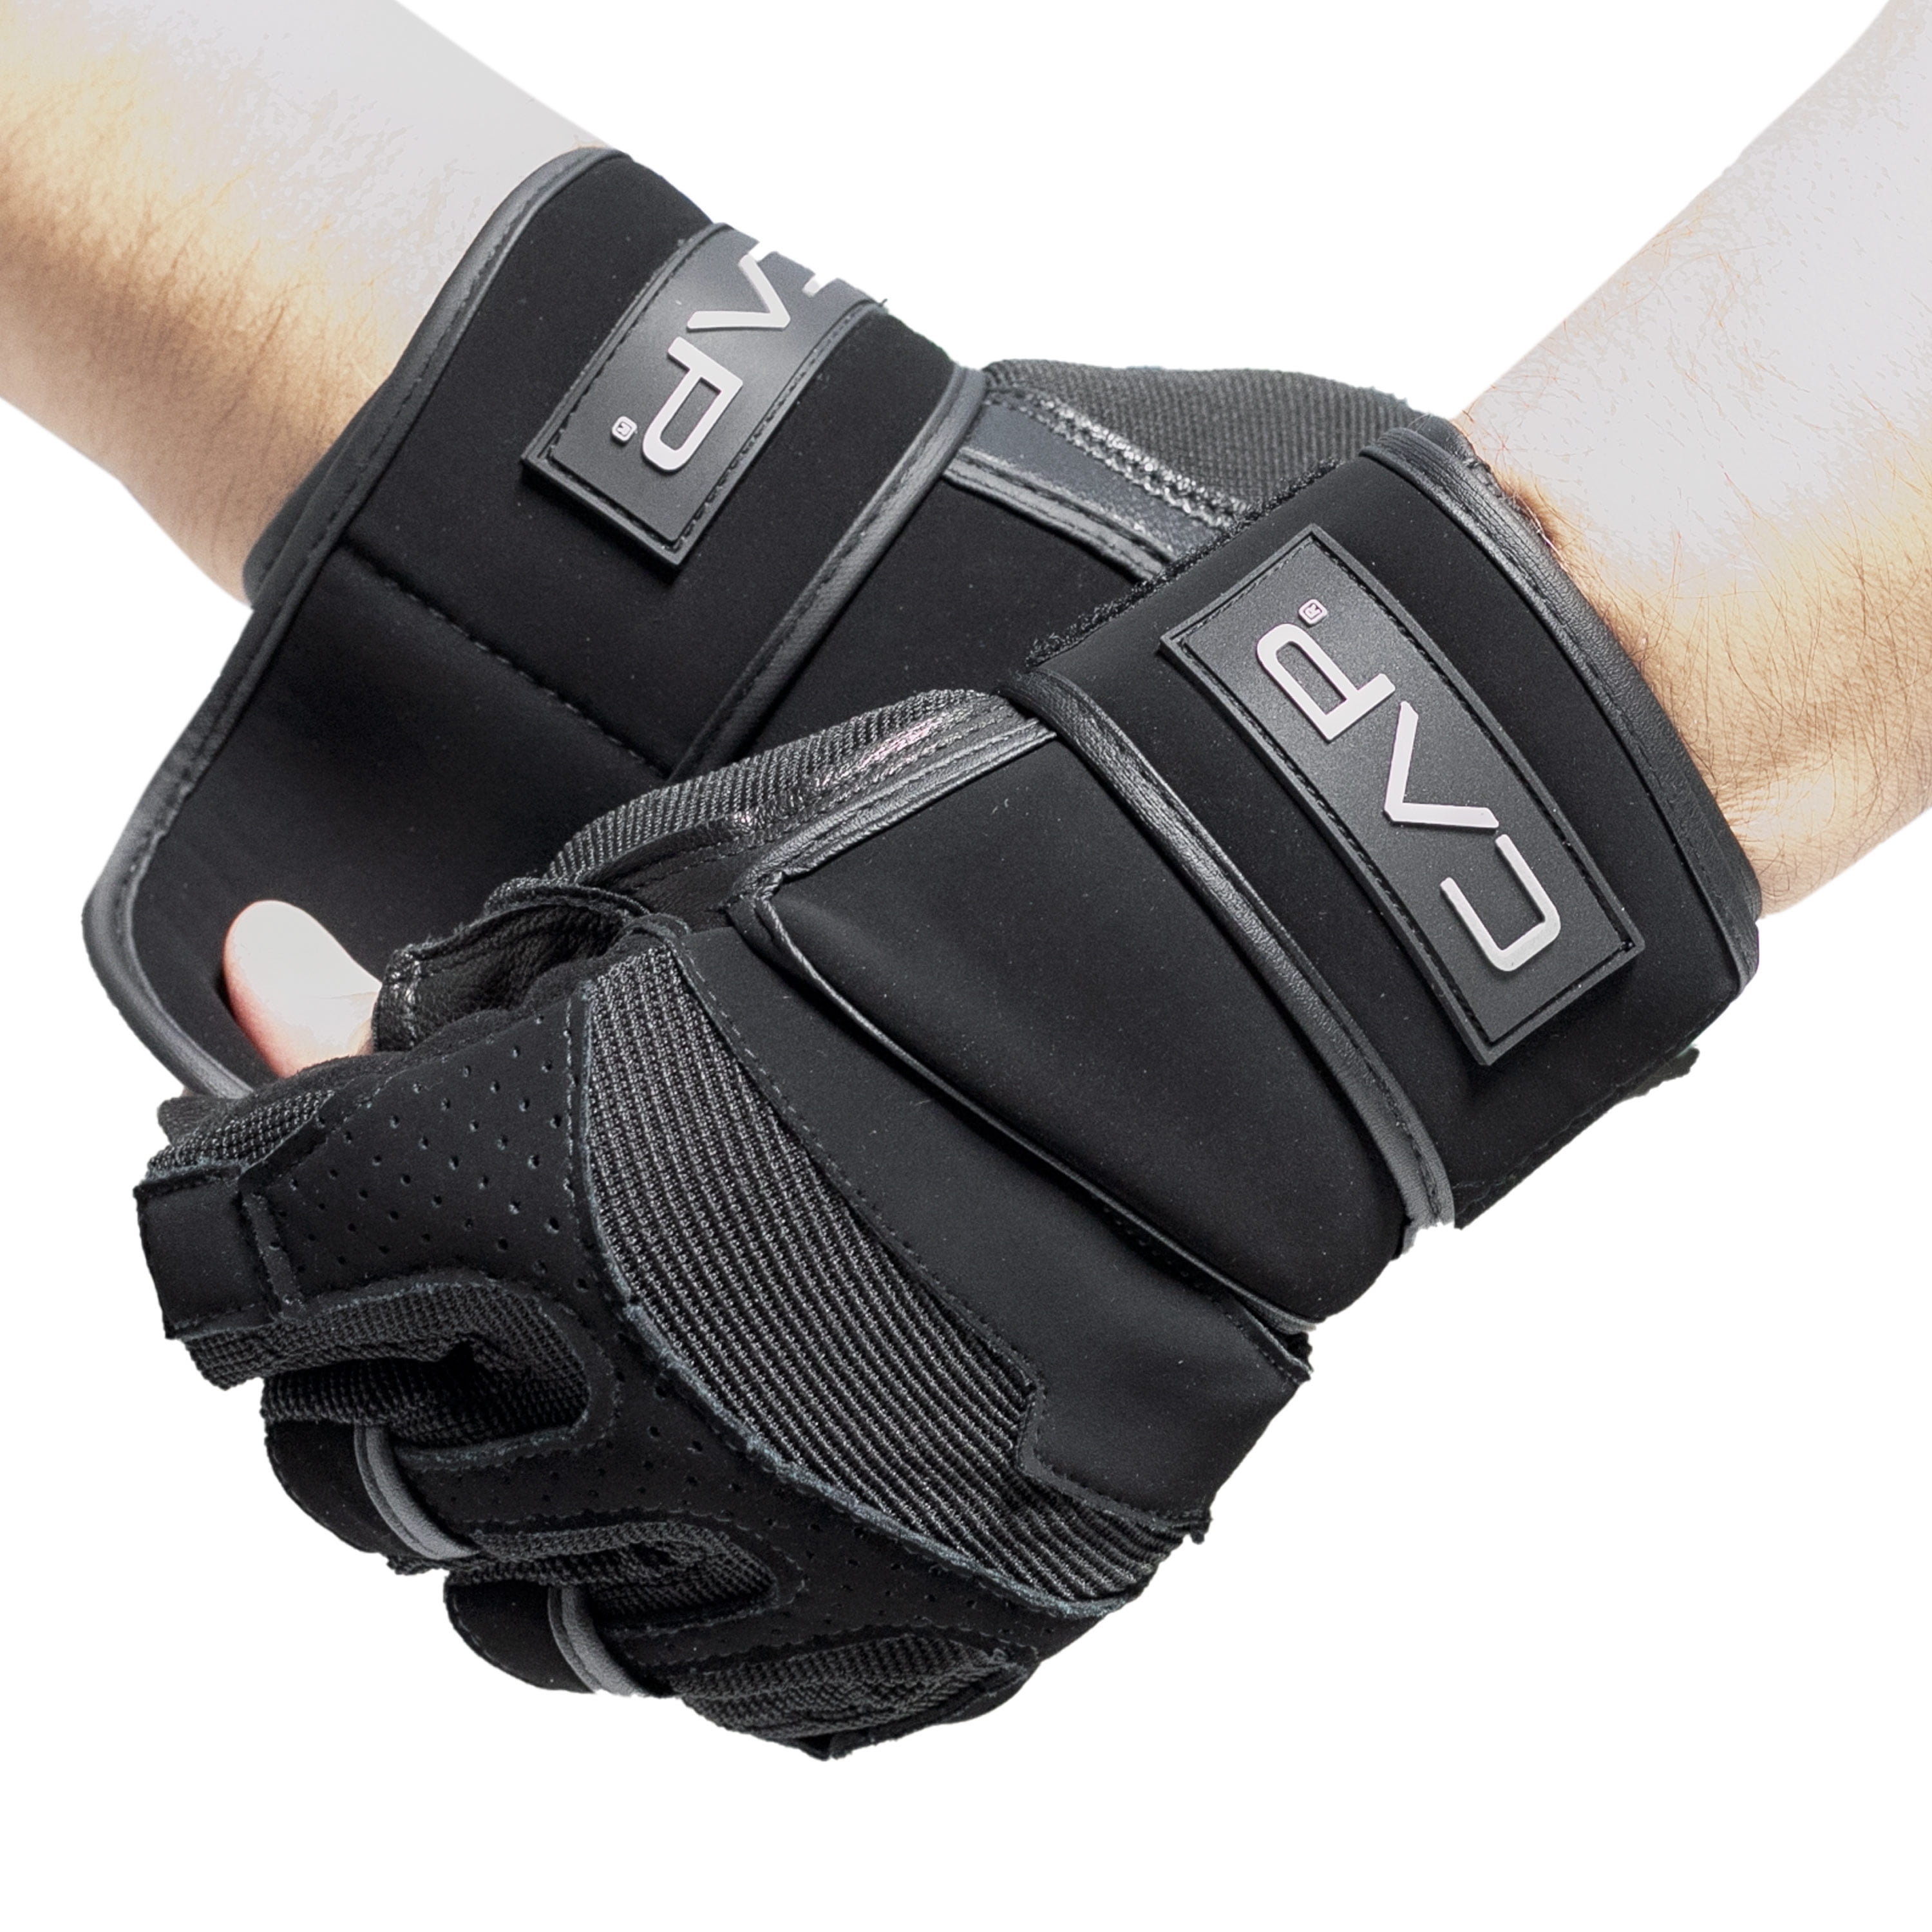 VELO Gym Weight Lifting Gloves Training Fitness Workout Wrist Straps Body 